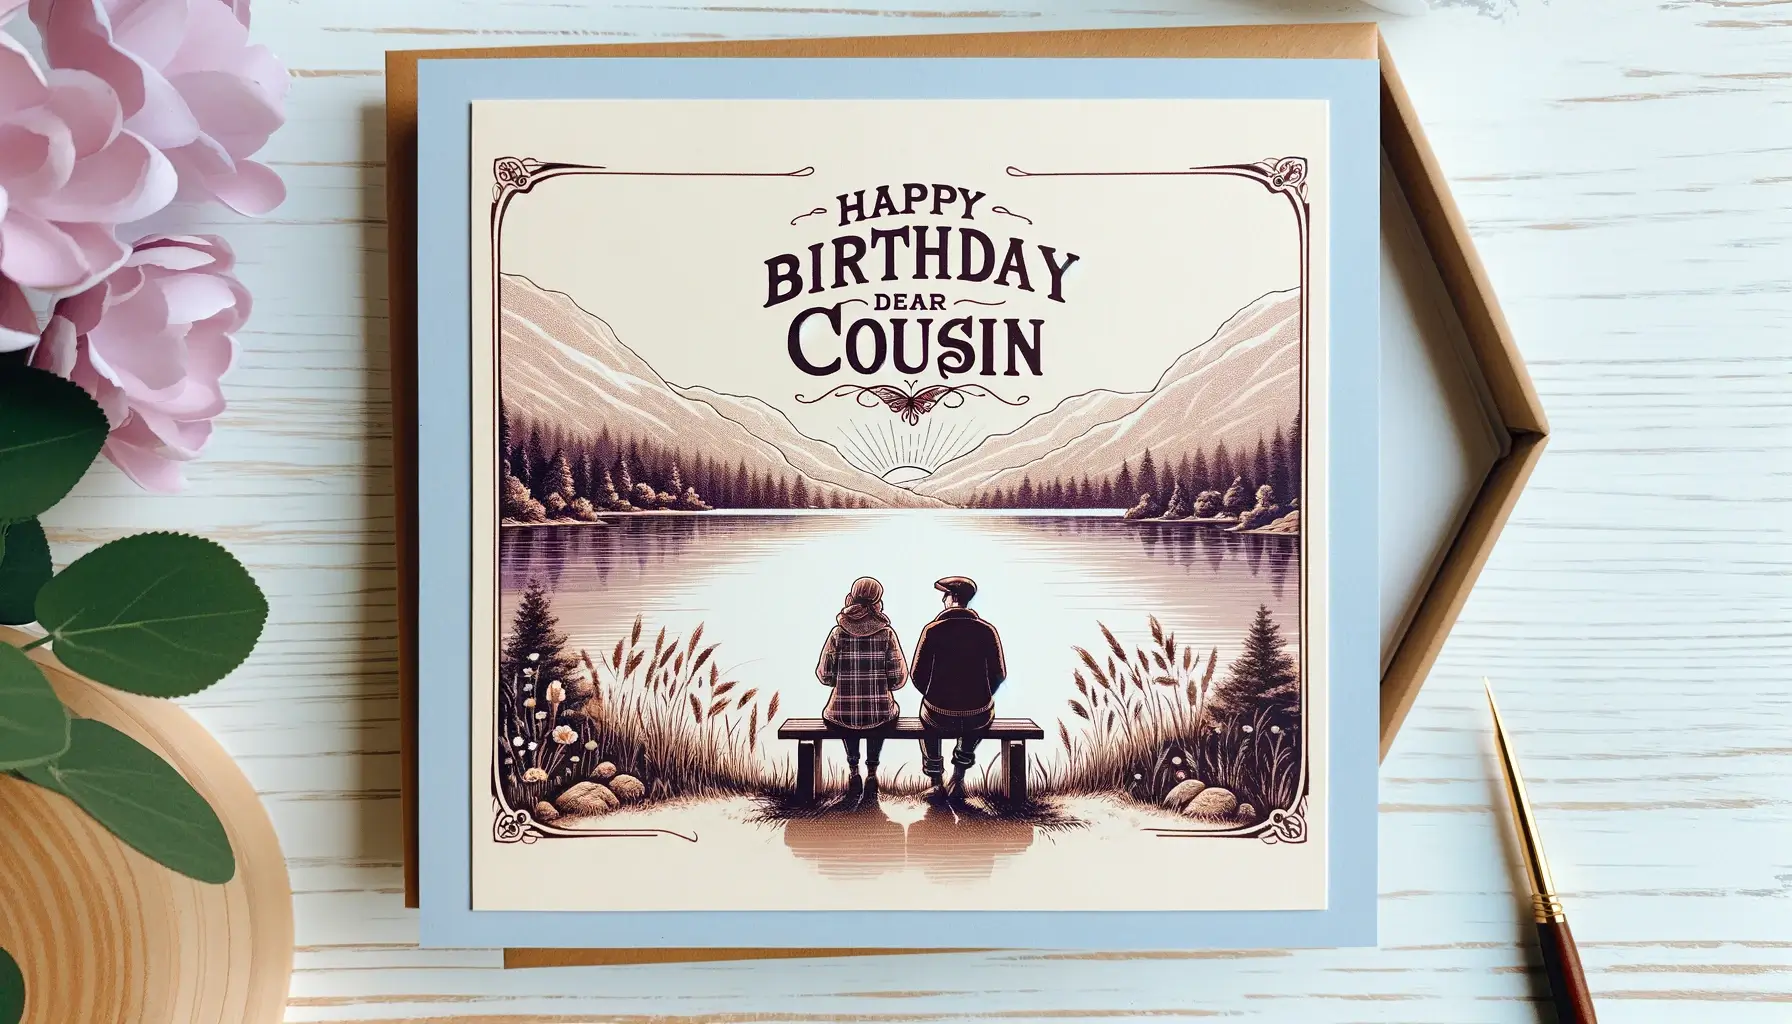 Cousin birthday card messages